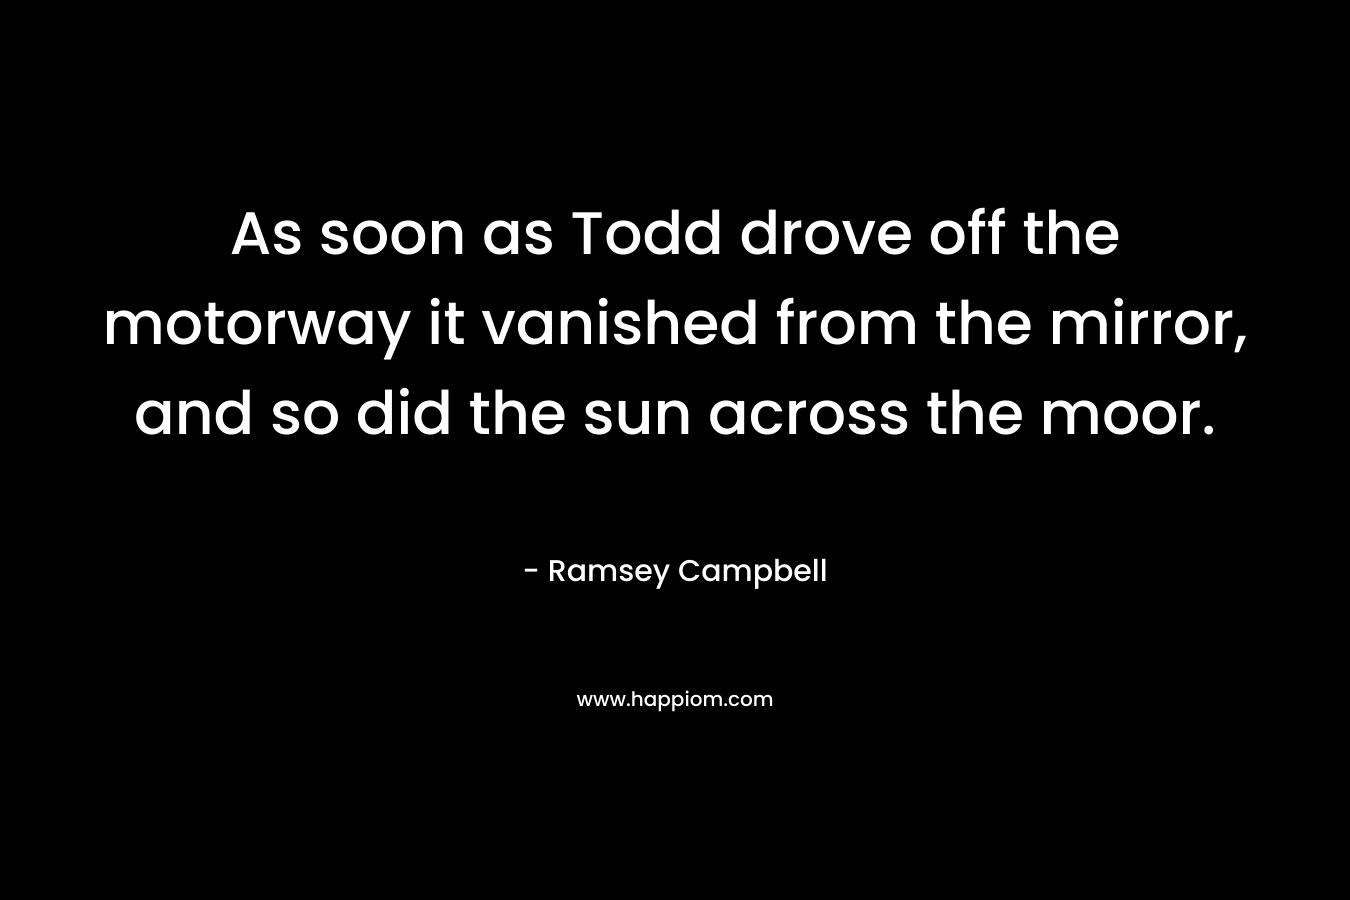 As soon as Todd drove off the motorway it vanished from the mirror, and so did the sun across the moor.